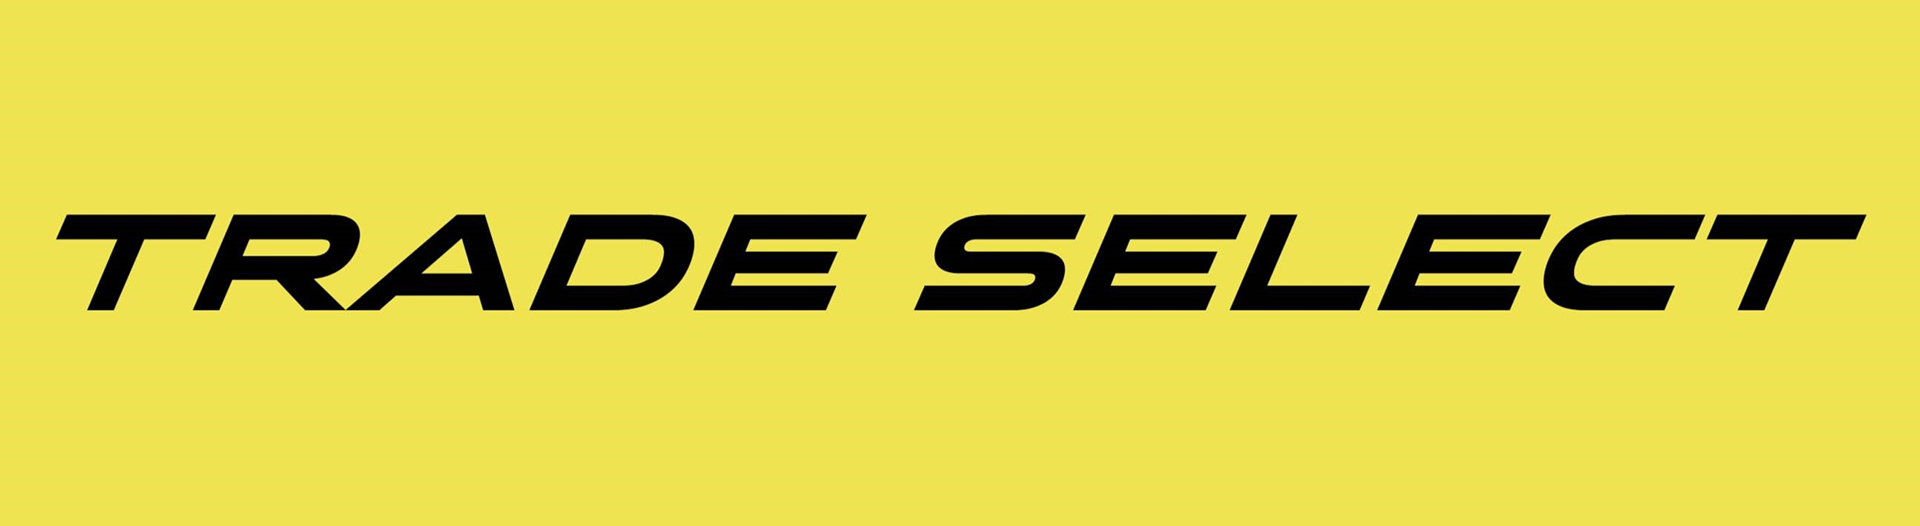 Trade Select - Used Cars Banner